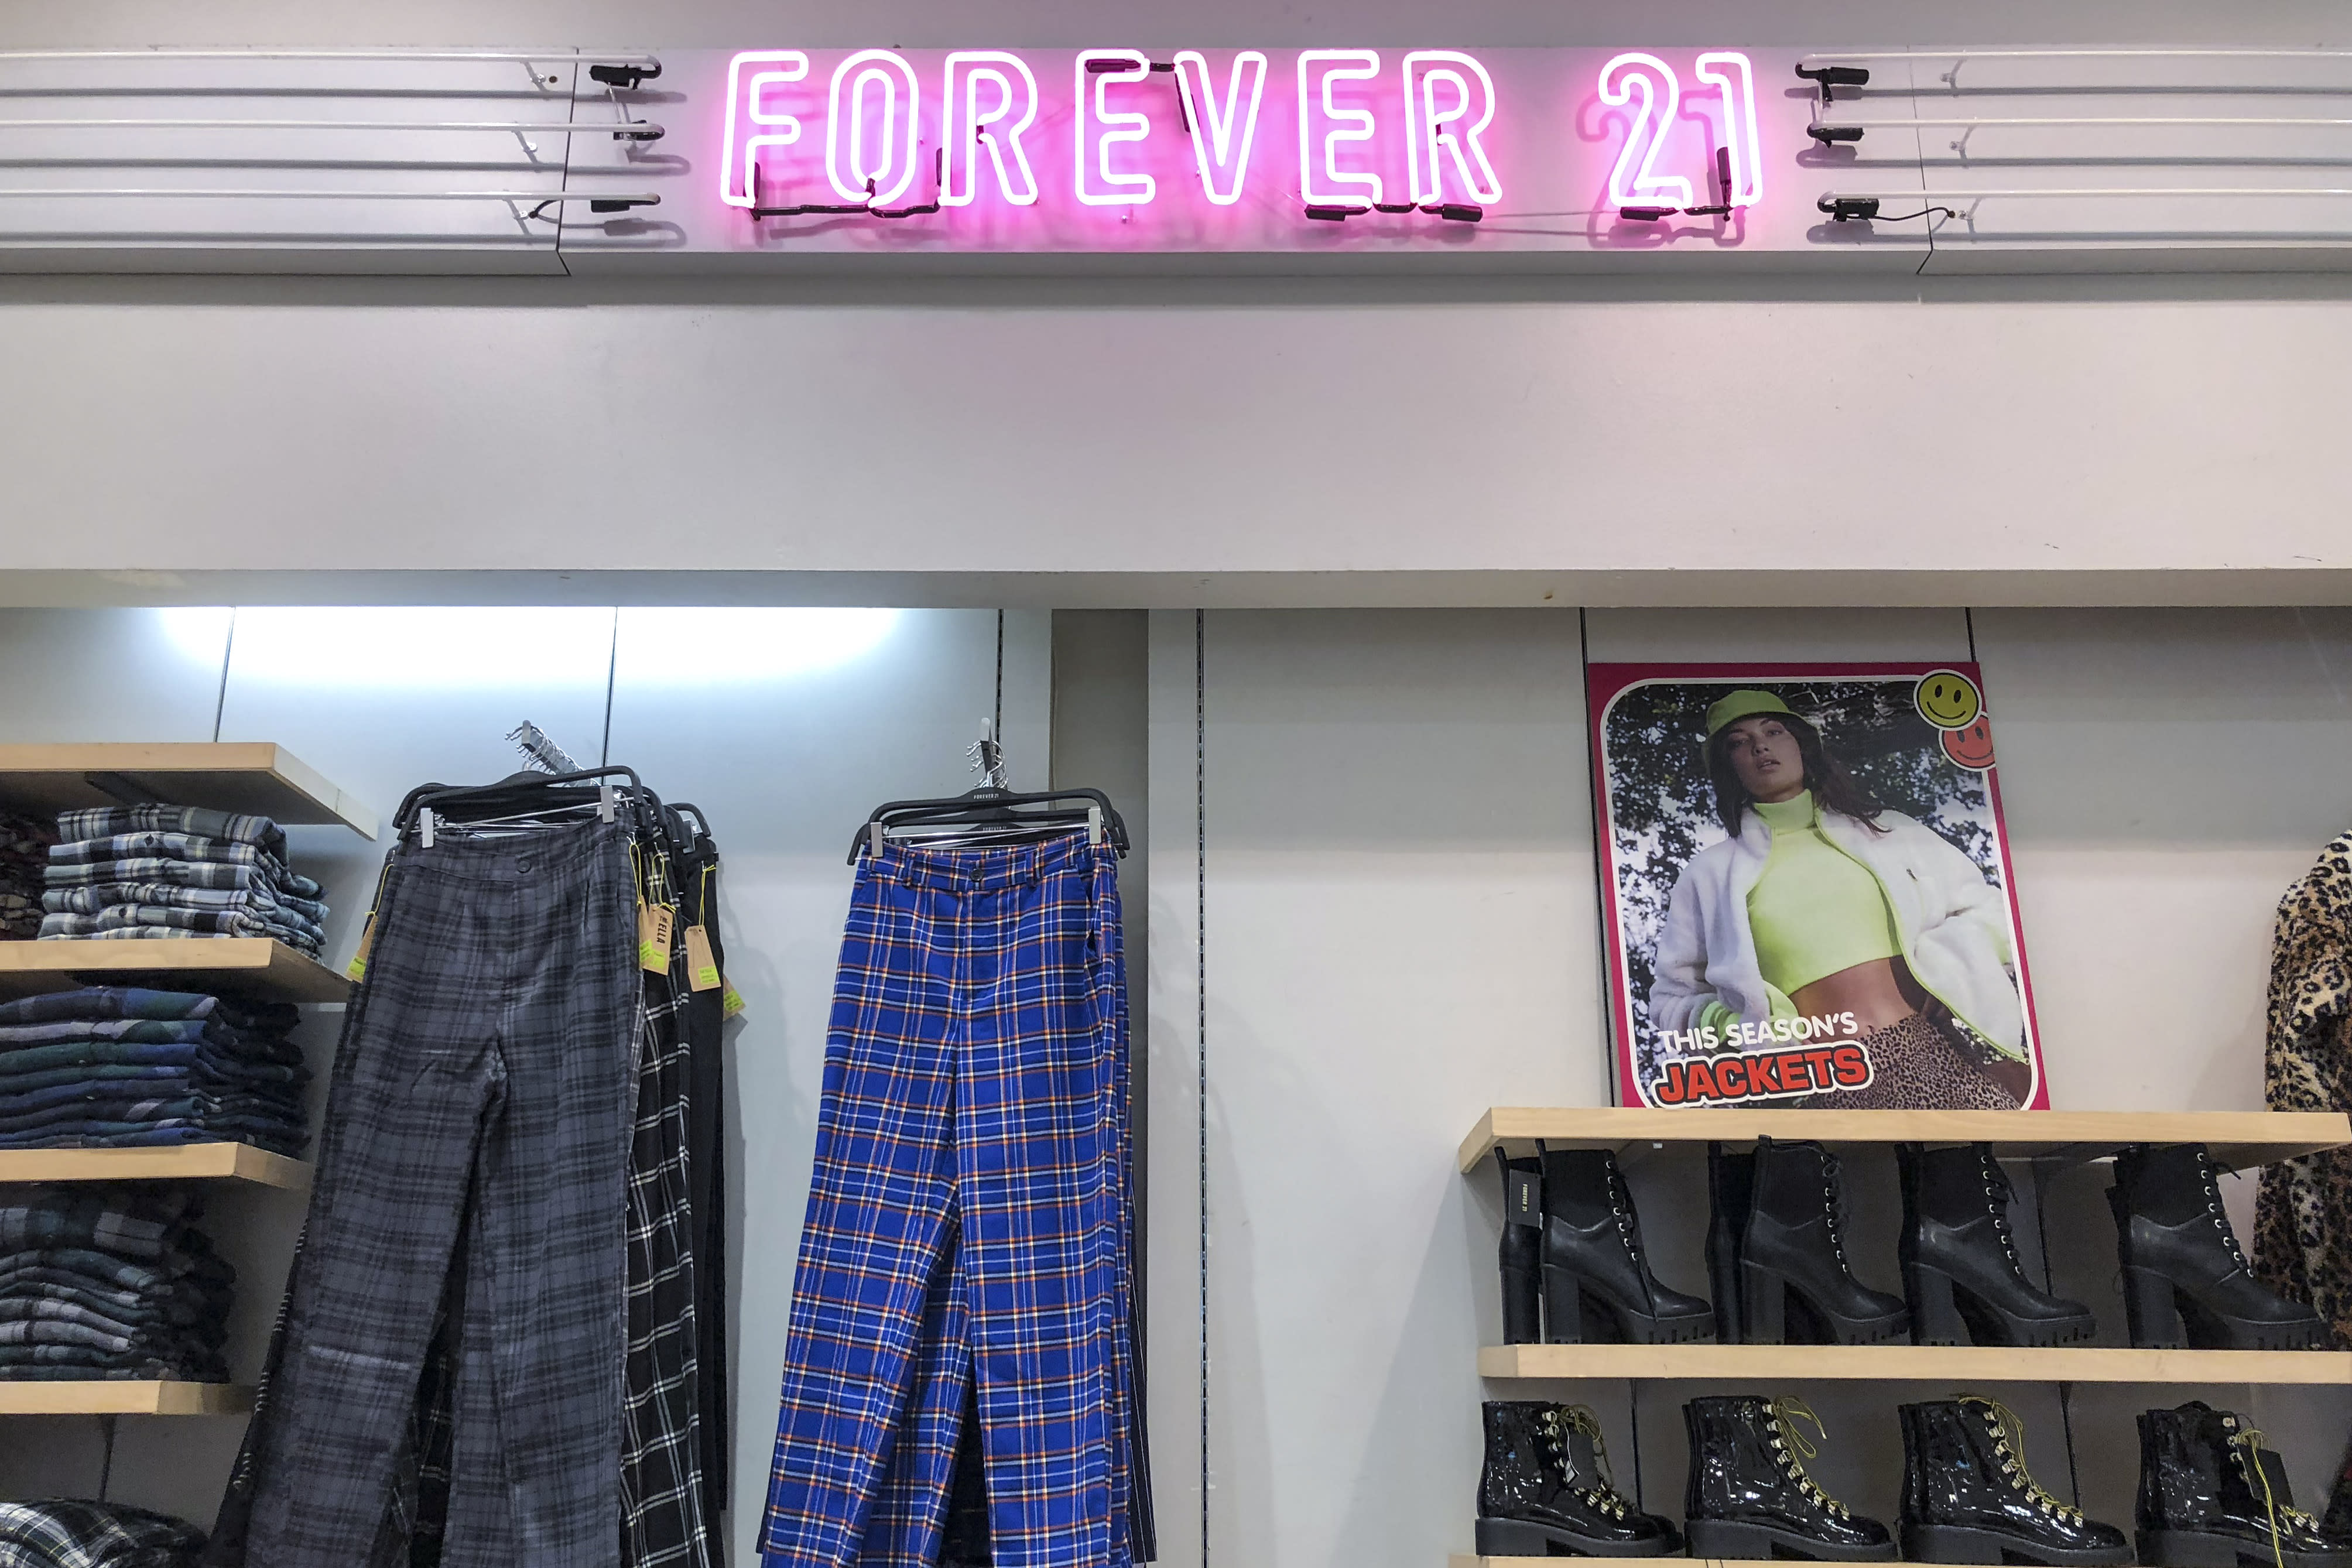 Why Forever 21 must go bankrupt and disappear